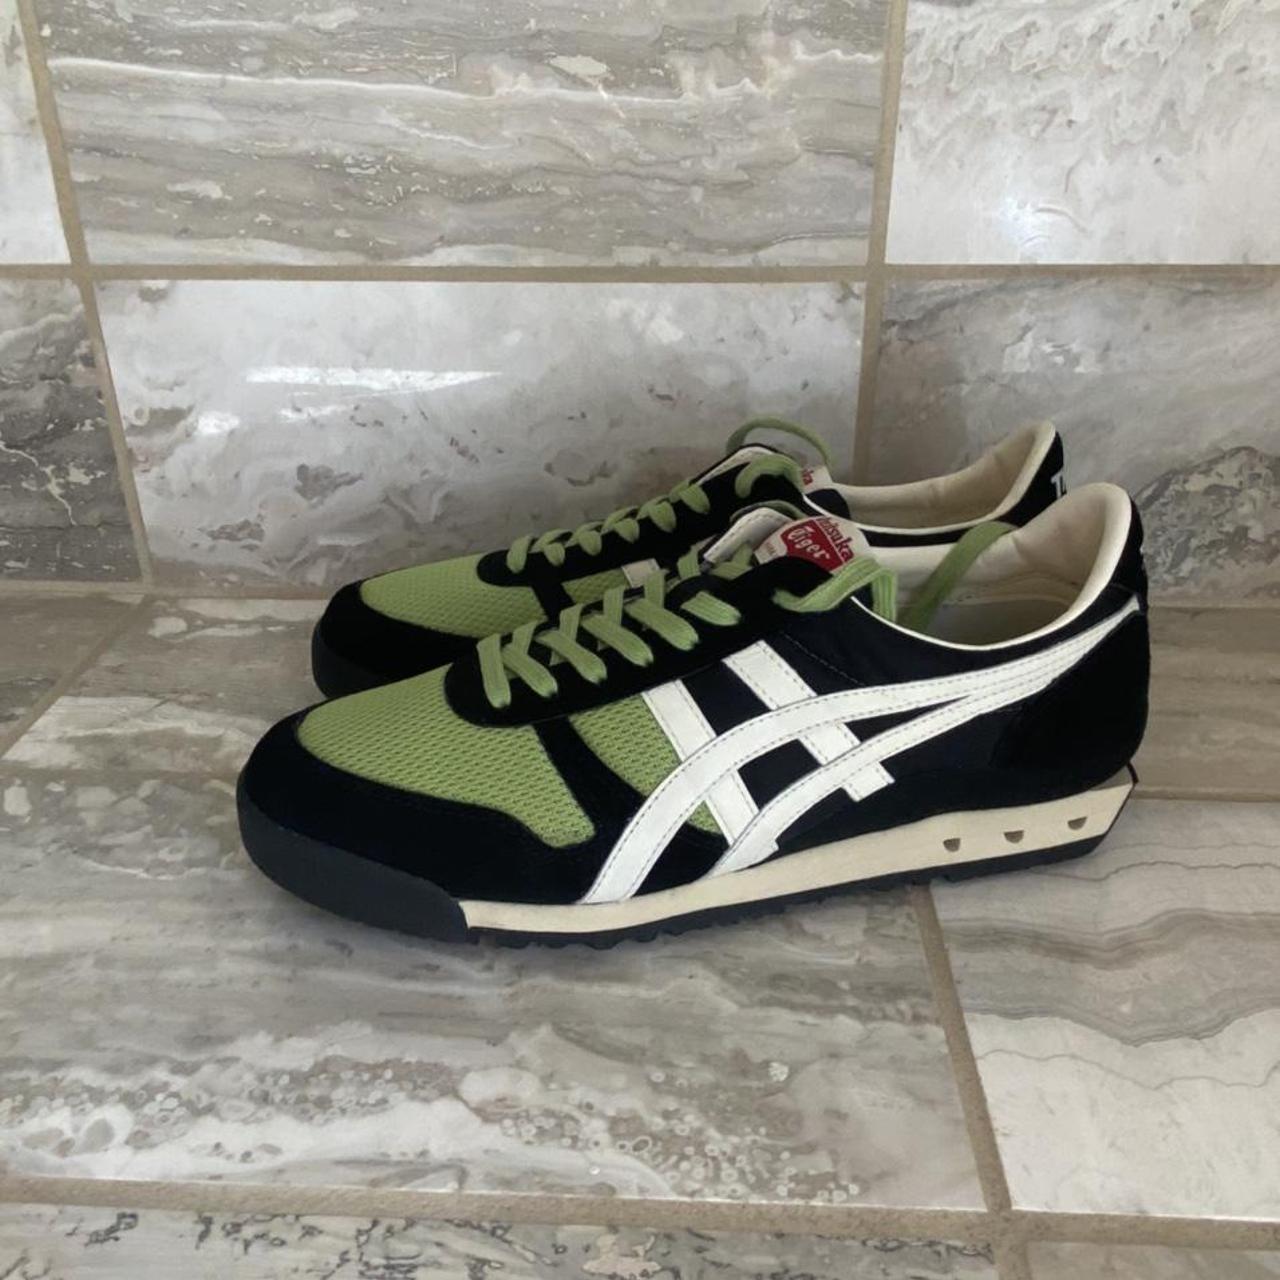 Product Image 1 - Onitsuka Tiger Ultimate 81s

new in